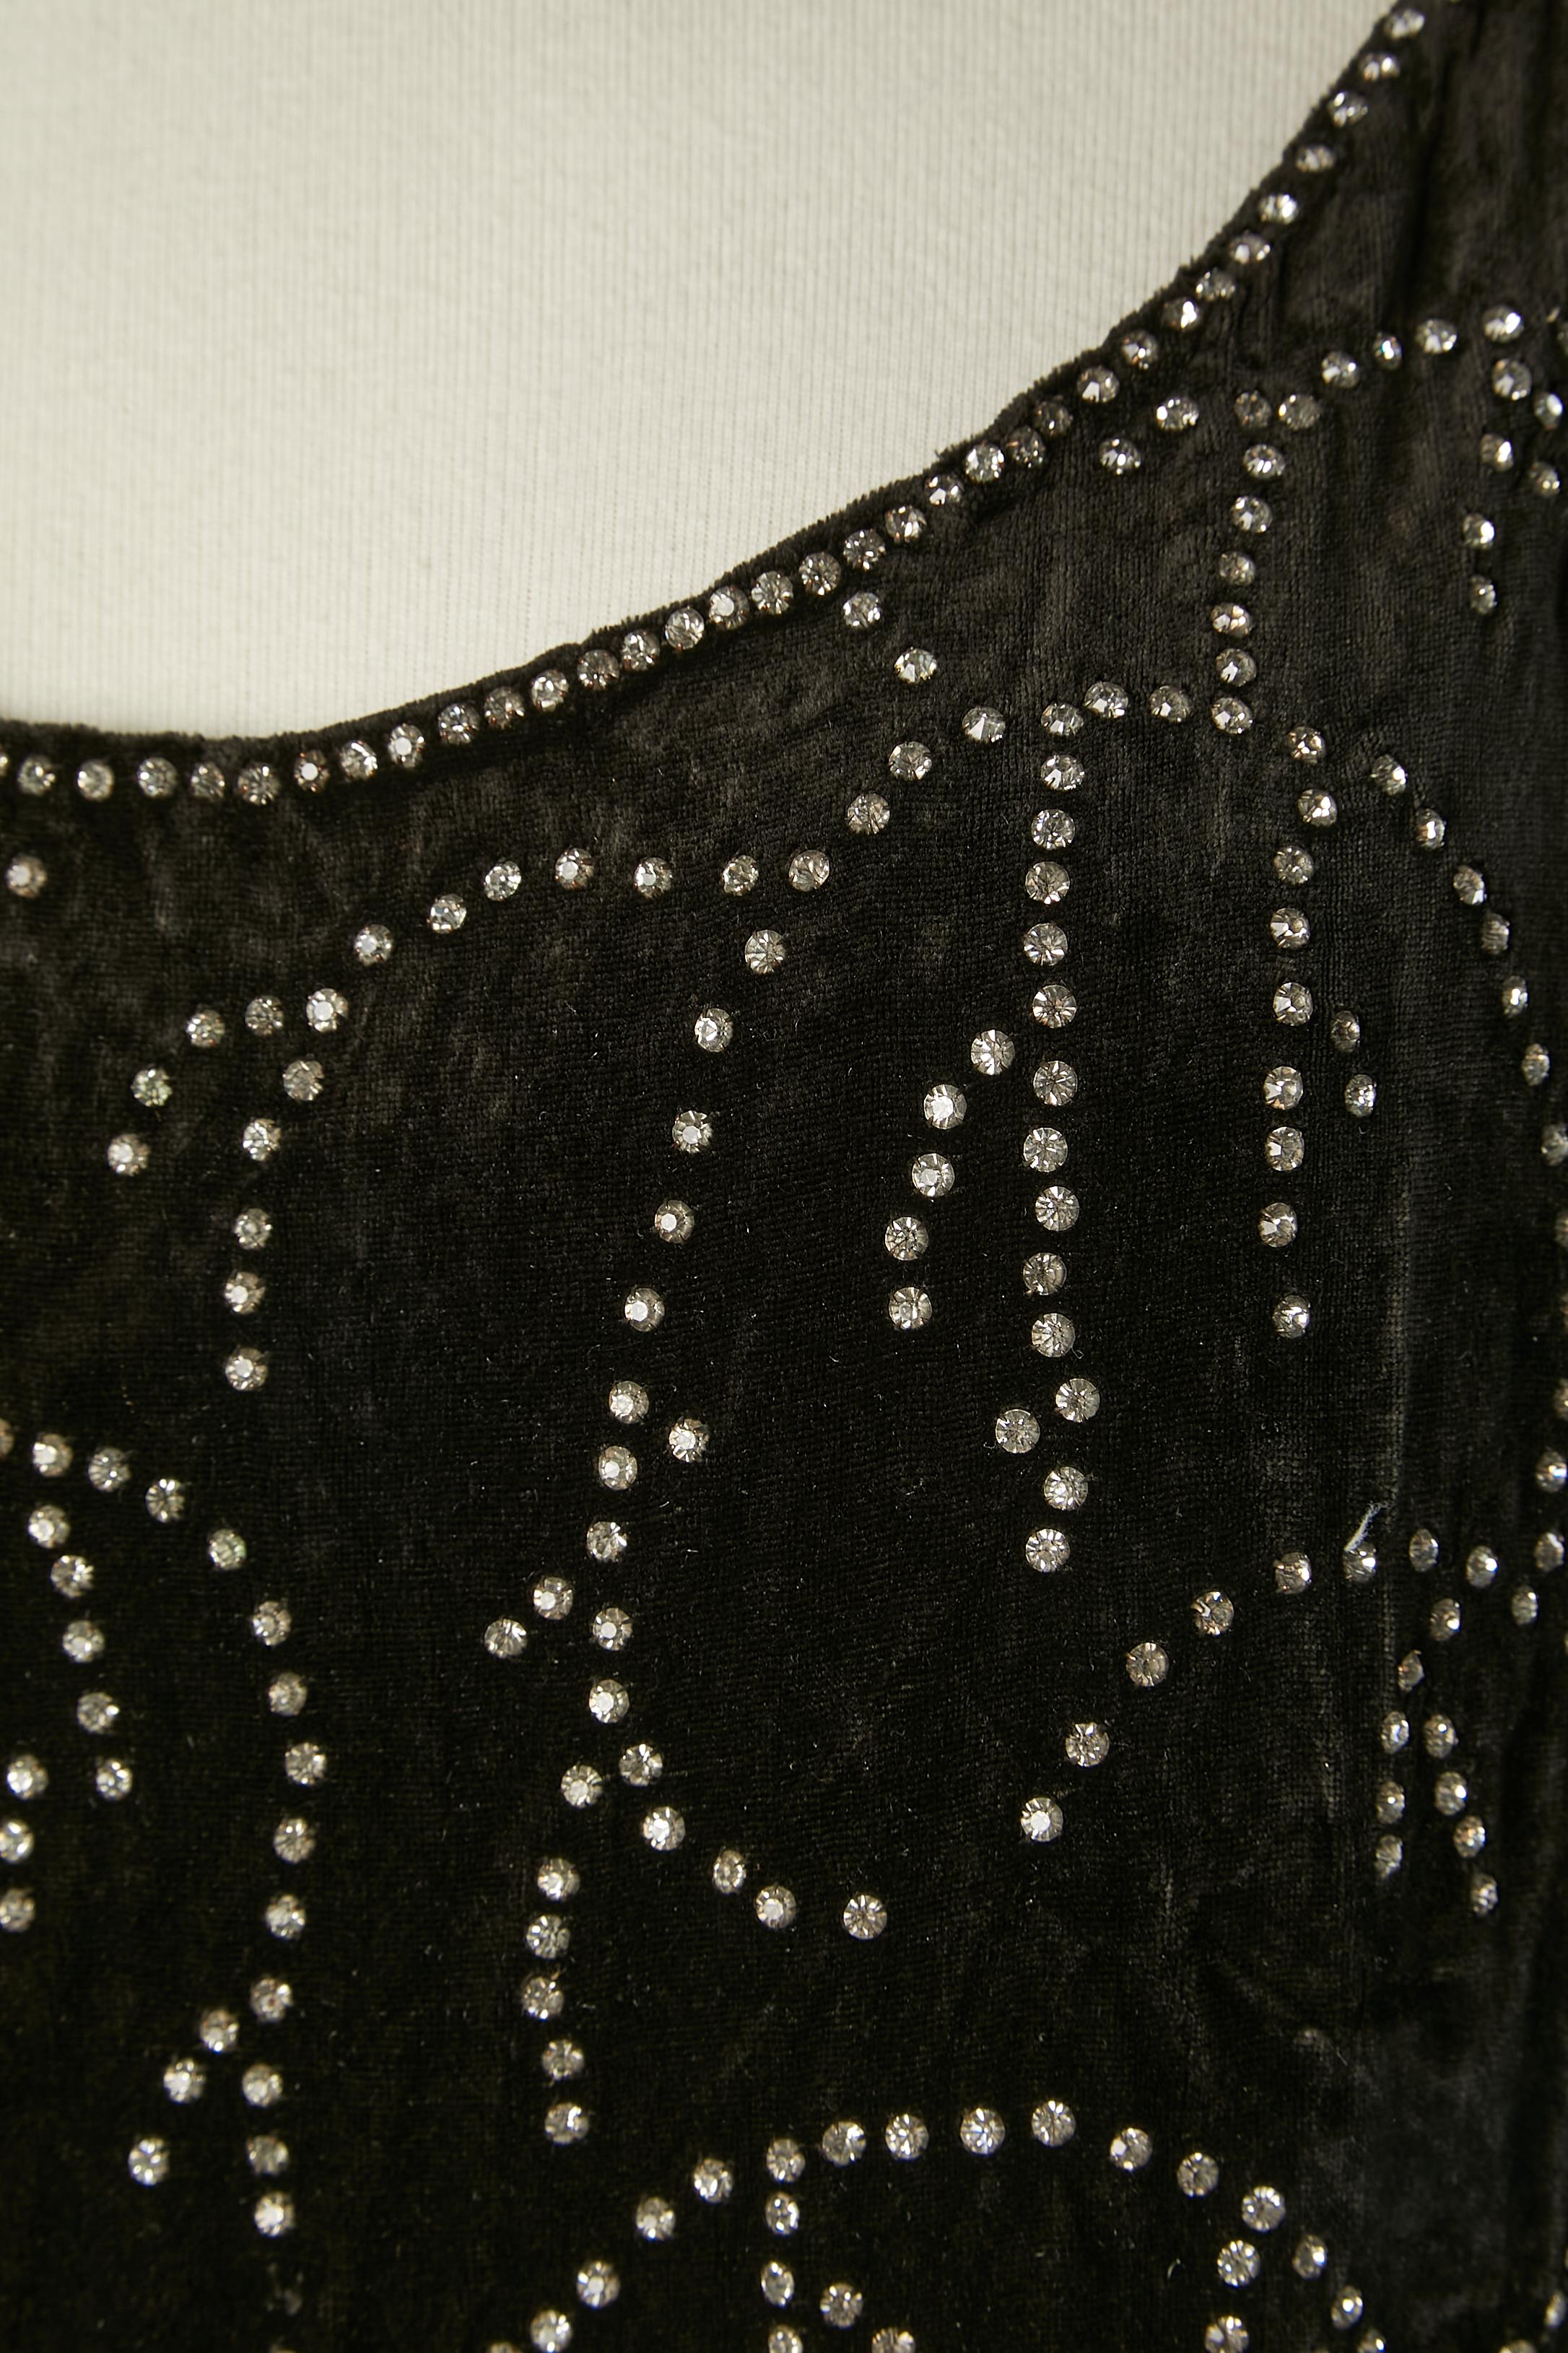 Black velvet tunique with rhinestone and beads fringes finish with silk threads.
No lining. Museum piece ( can be wear but in a very delicate way)
SIZE L